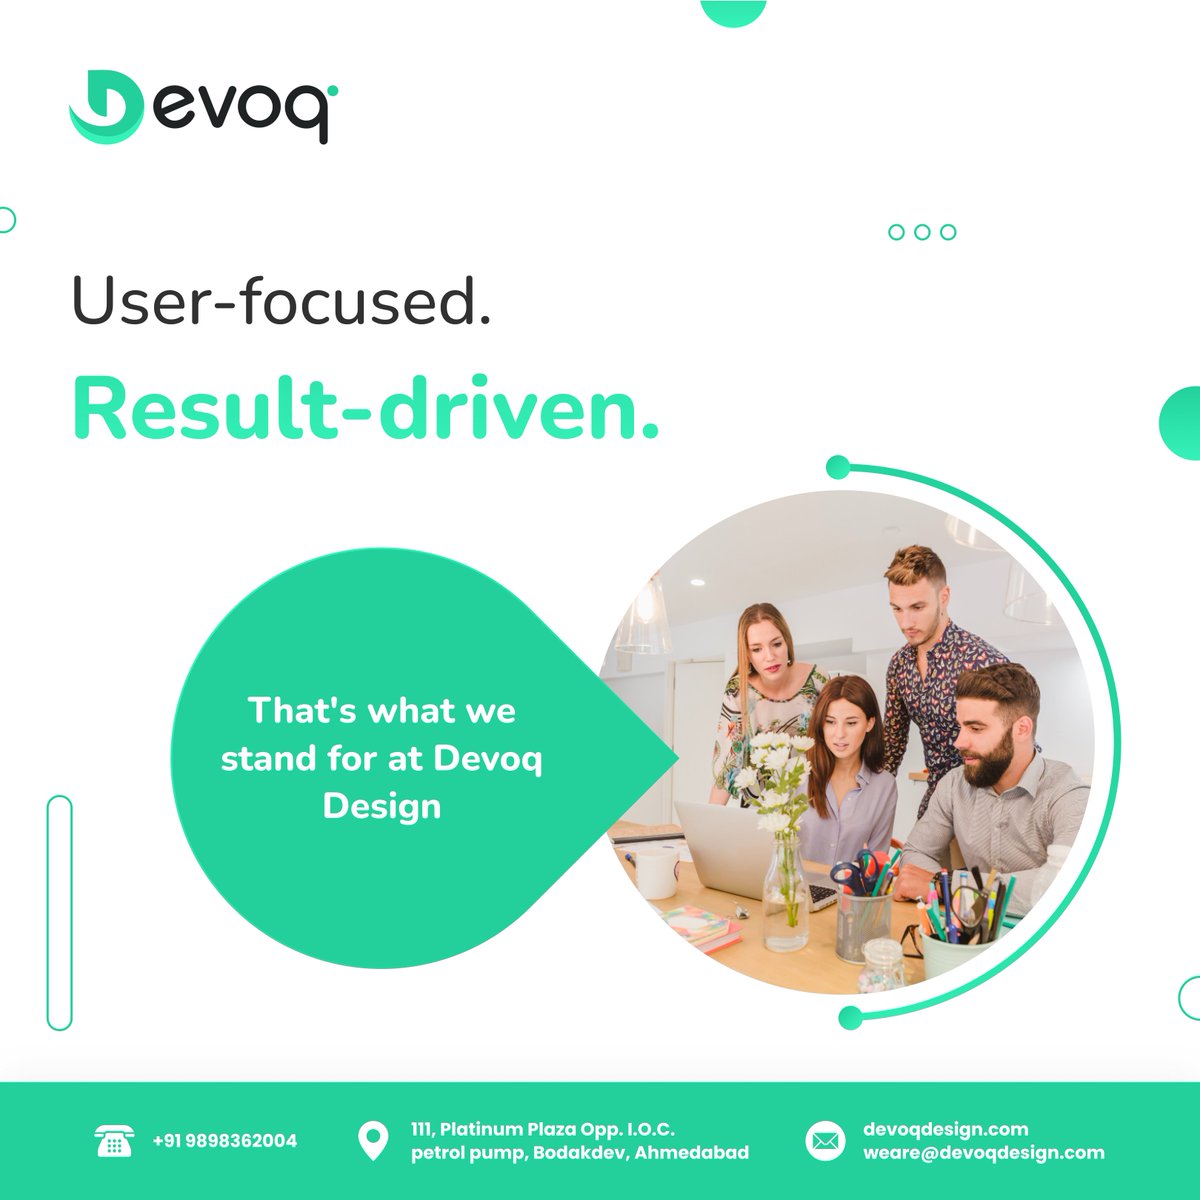 Our team works tirelessly to create UI/UX experiences that convert visitors into loyal customers! Let's take your business to the next level! #DigitalConversion #CustomerEngagement #UIUXAgency #BusinessBoost